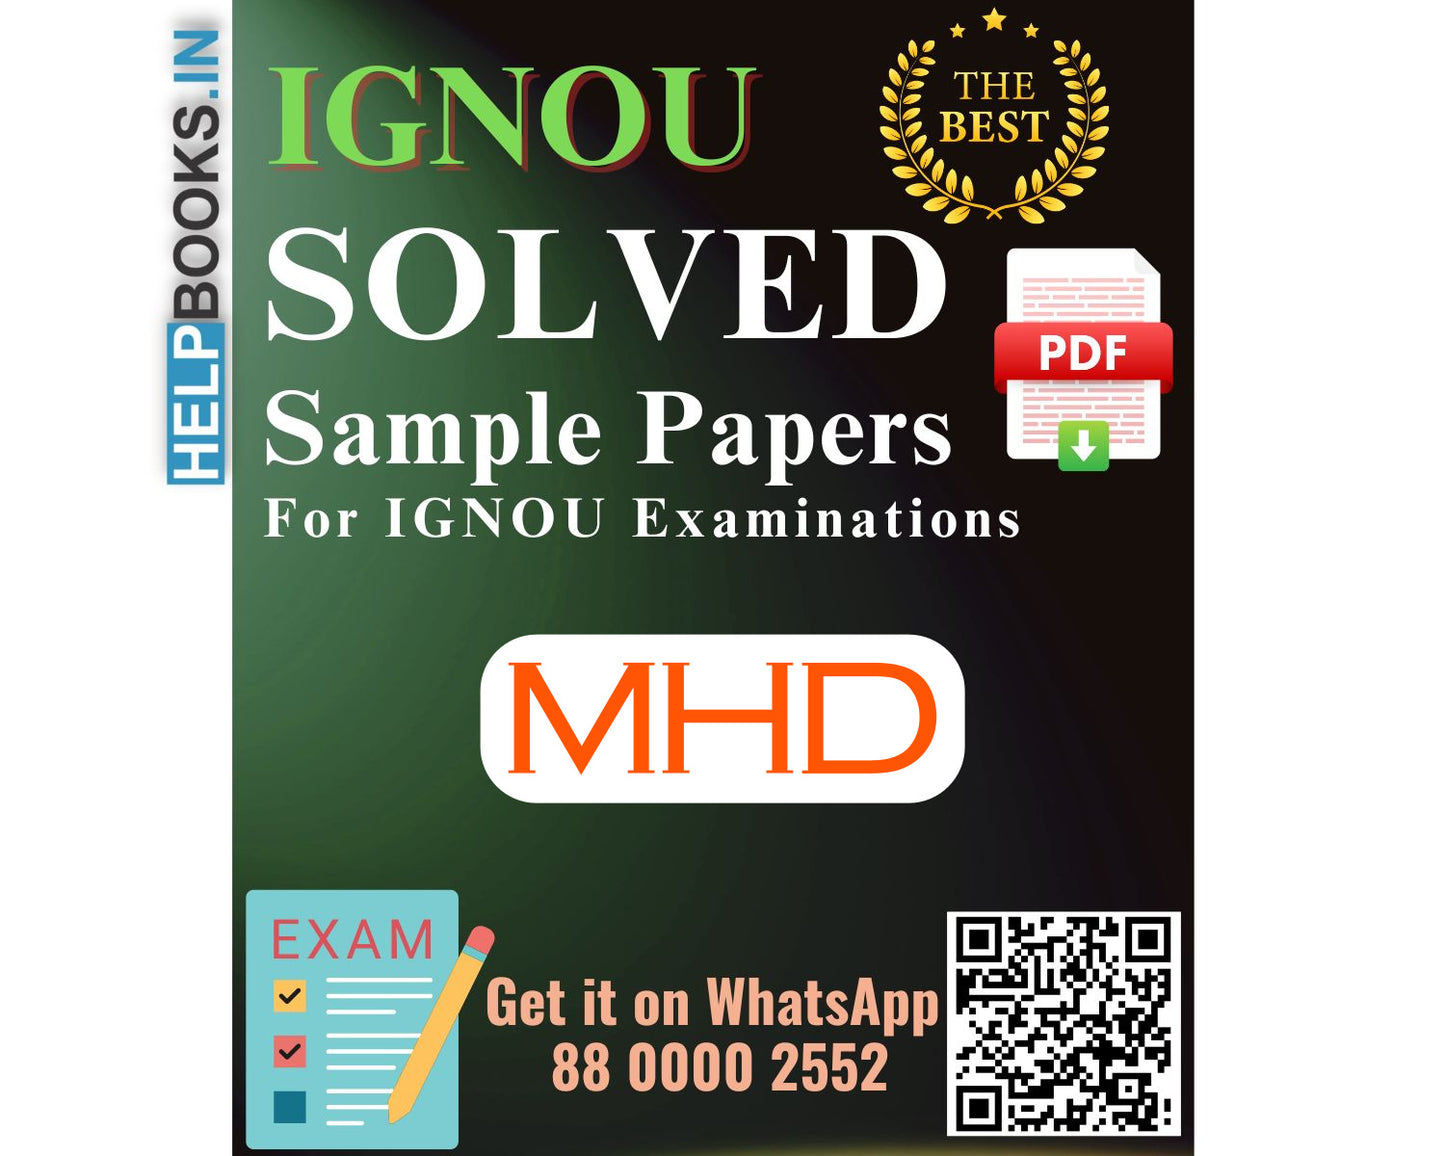 IGNOU Master of Arts (Hindi) (MHD) | Solved Sample Papers for Exams